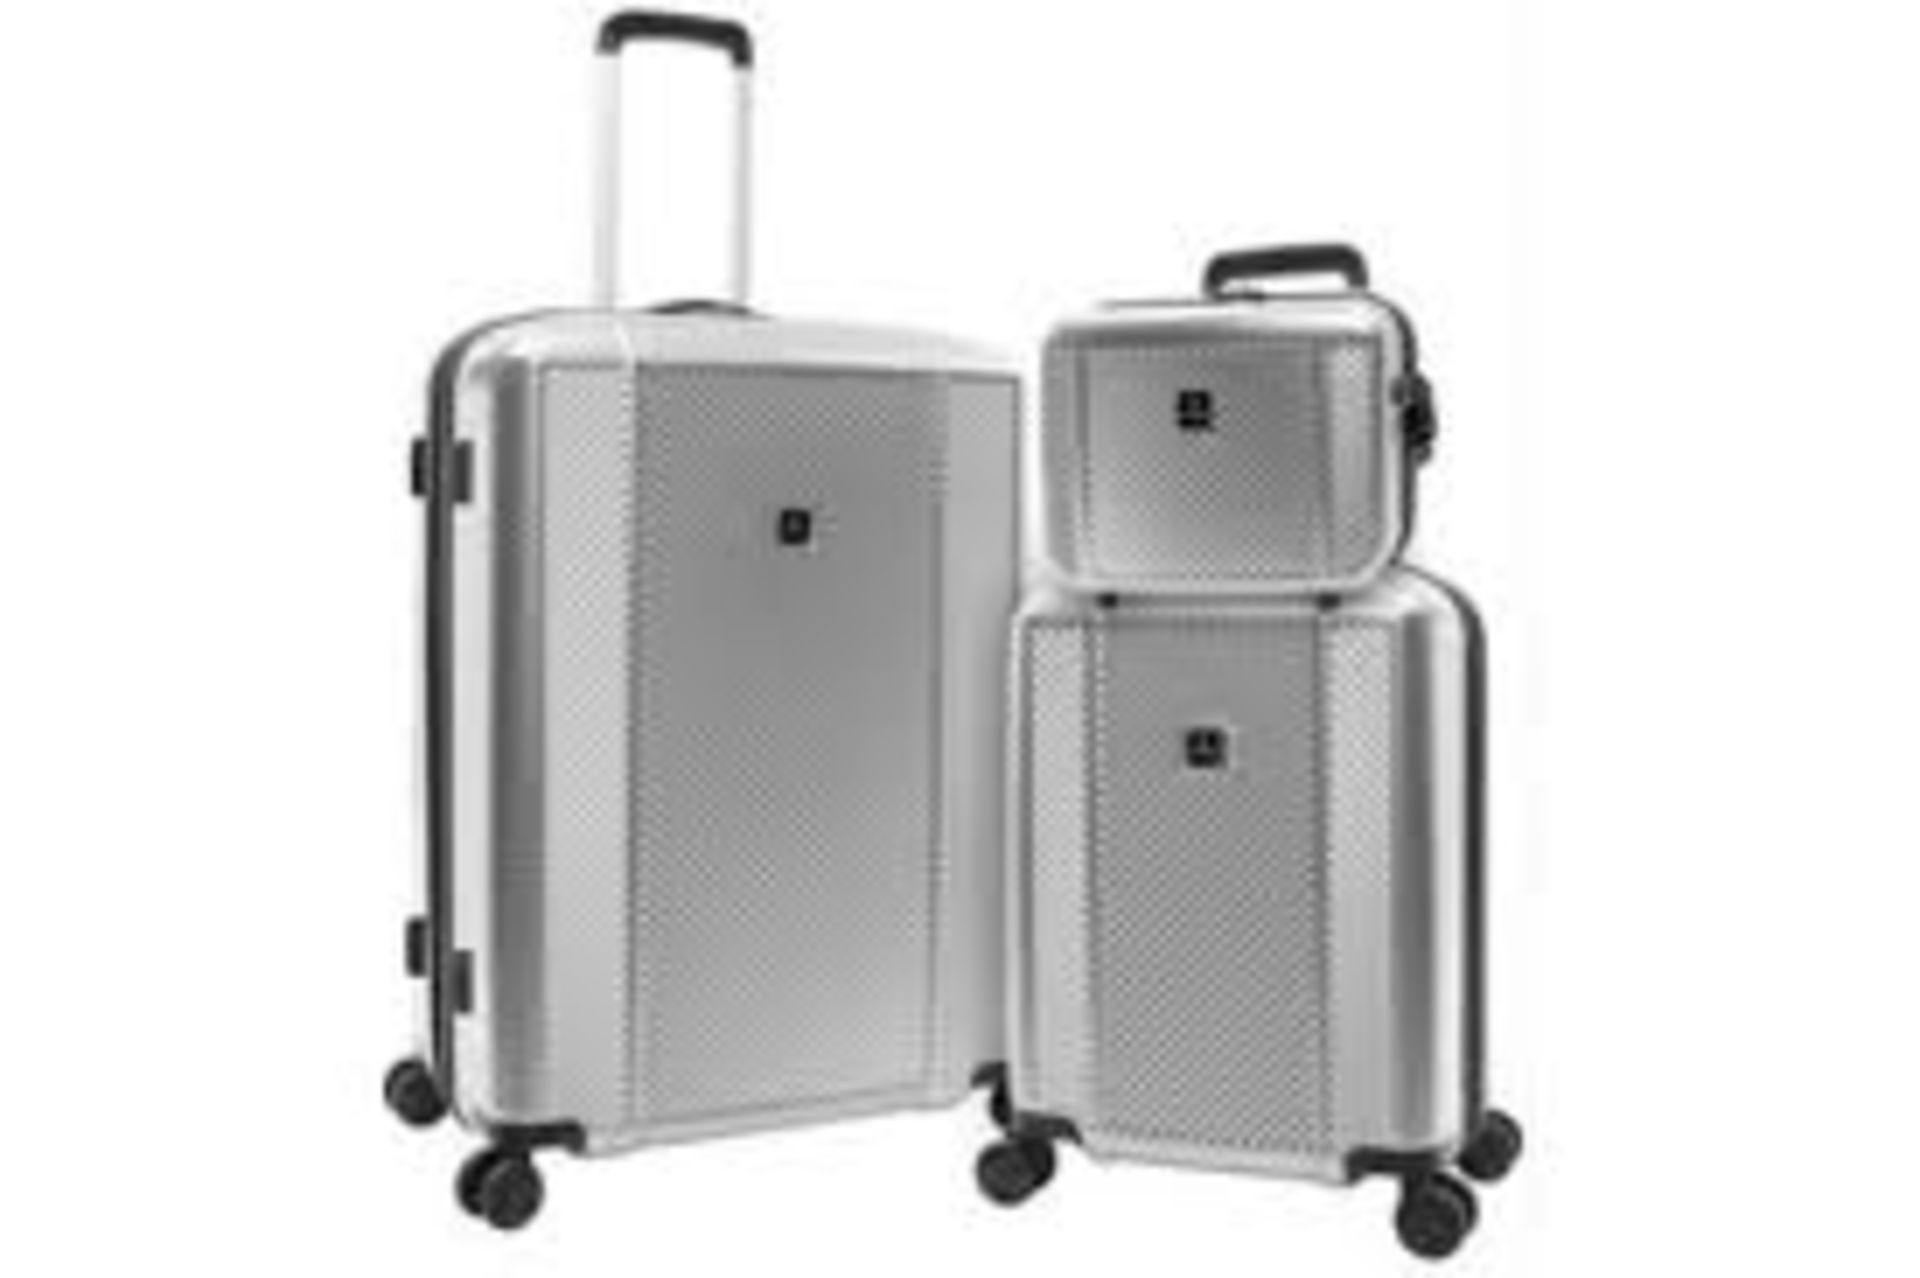 New Boxed 3 Piece Sets of TAG Spectrum Hardside Luggage Set. (SILVER). RRP £199.99 per set. Get